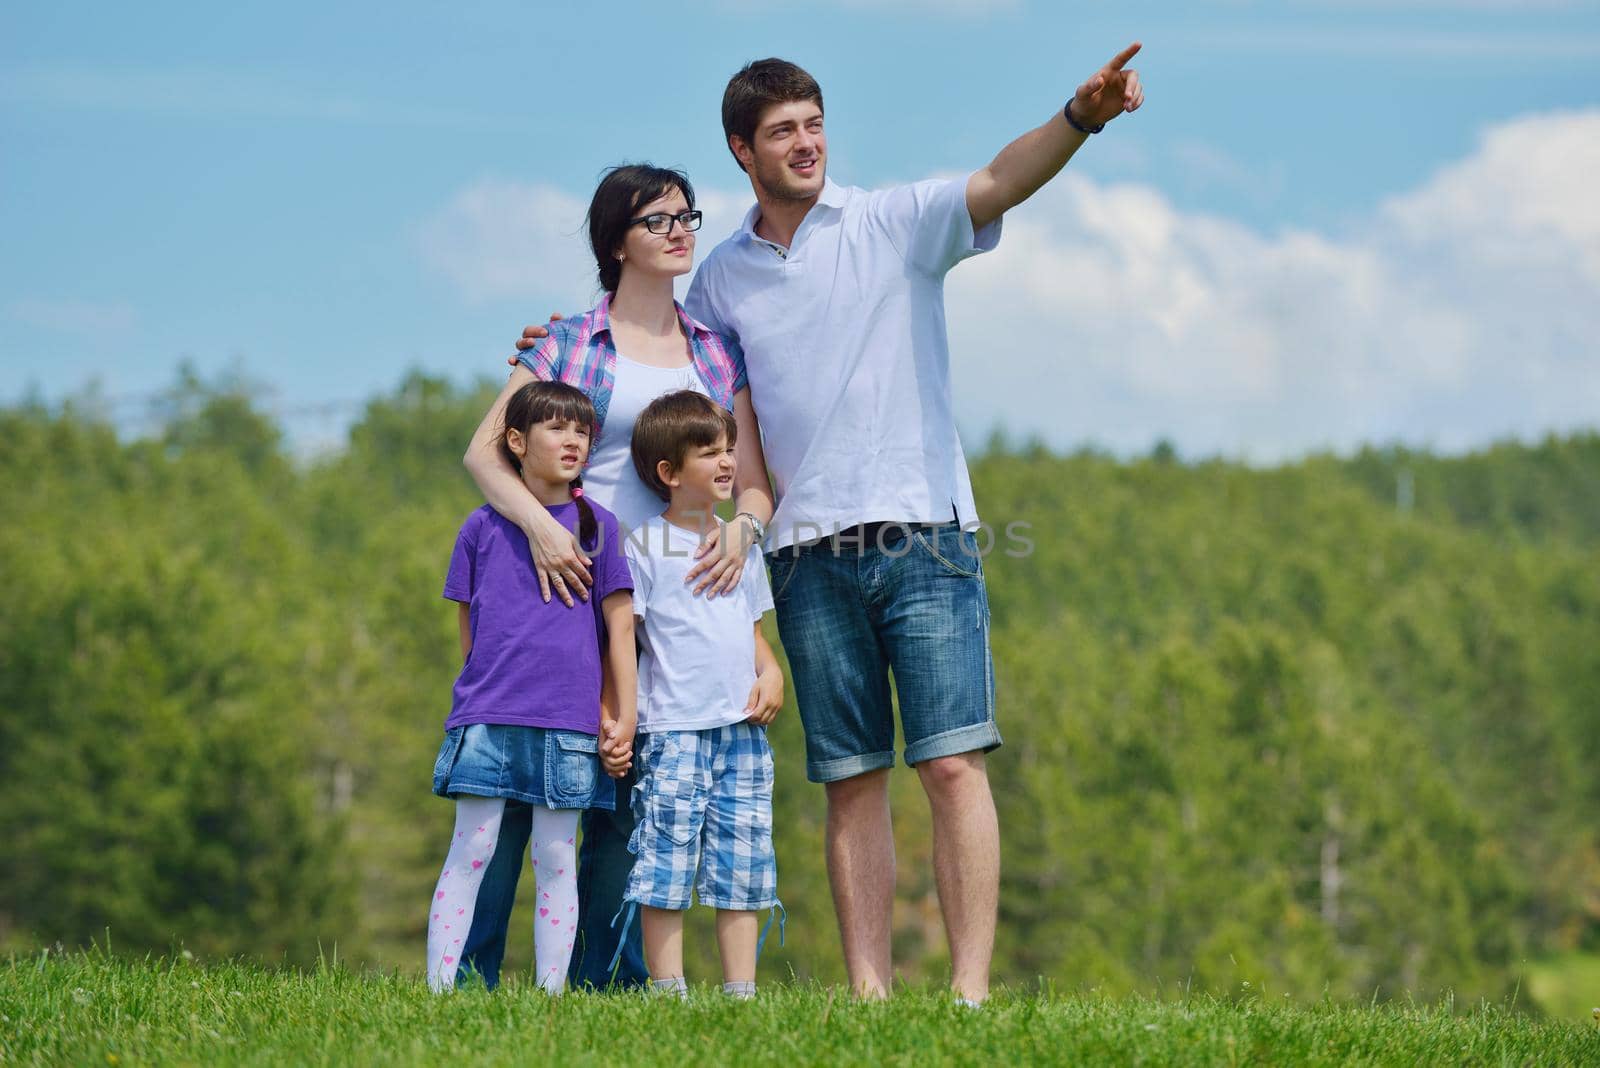 happy young family with their kids have fun and relax outdoors in nature with blue sky in background